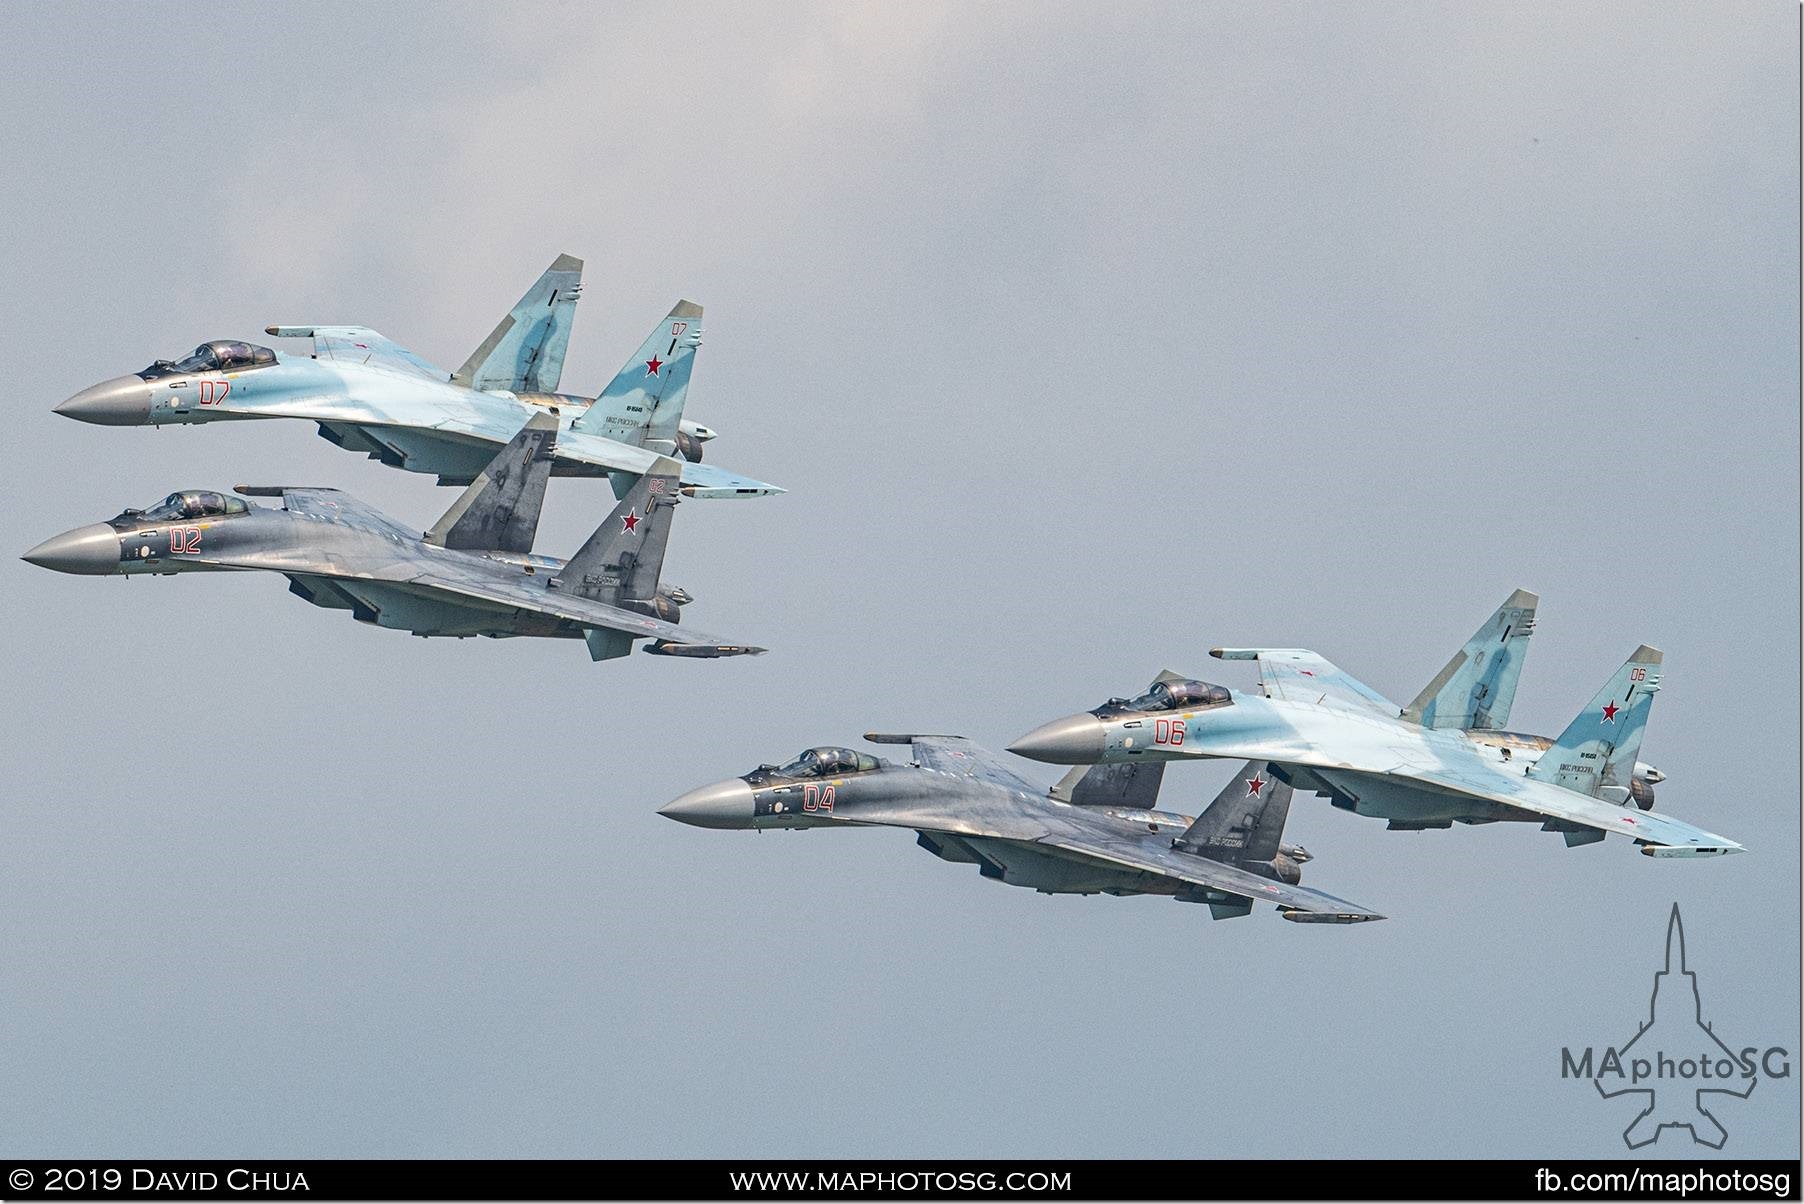 Formation of four Sukhoi Su-35S fighters